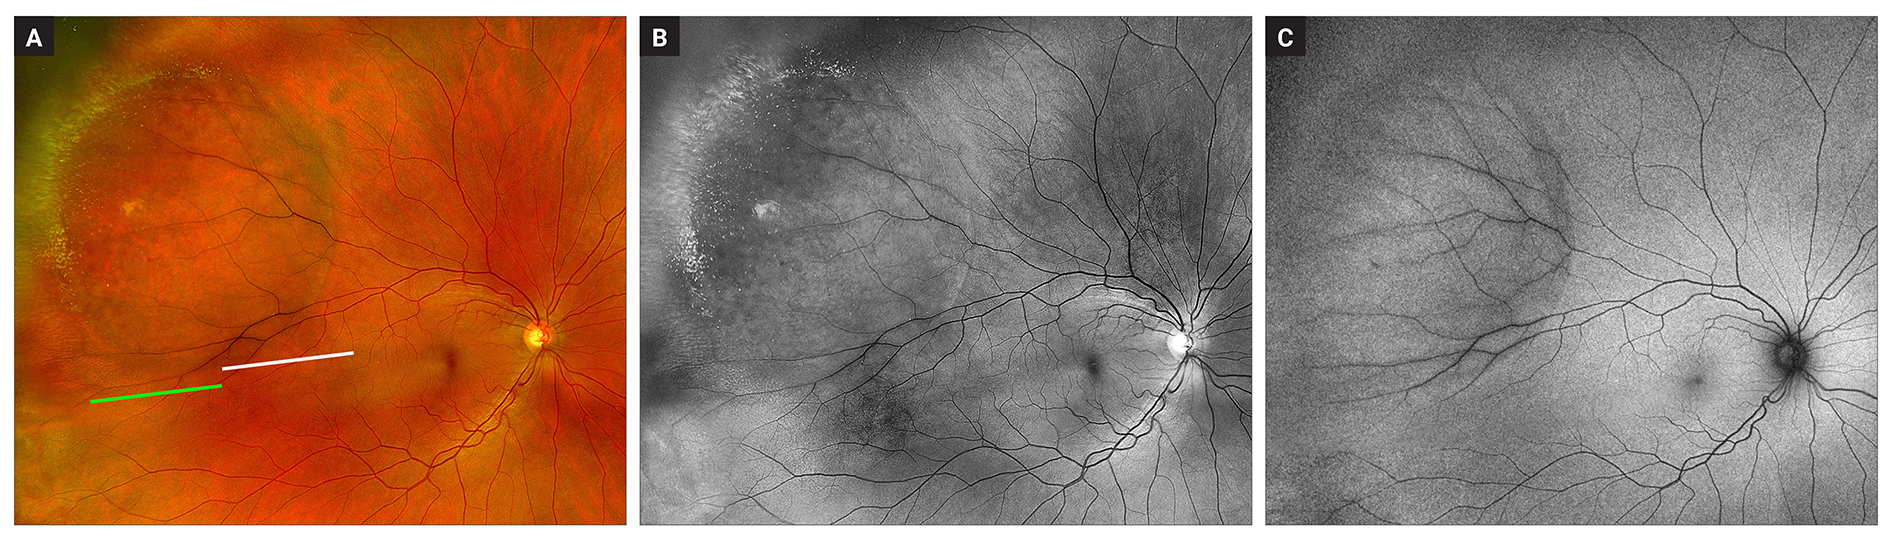 These images from the study show superotemporal degenerative retinoschisis in the right eye: (a) Pseudocolor image shows smooth, dome-shaped retinal elevation with well-defined and darker vasculature. Reticular pattern is visible in the anterior half of the area of retinoschisis and there are hyperreflective foci present at the anterior border of the area of retinoschisis. (b) Green-separated image showing reticular pattern and hyperreflective foci corresponding to the distribution on the pseudocolor image. (c) Autofluorescence imaging showing a hypoautofluorescent posterior border and isoautofluorescence over the area of schisis.